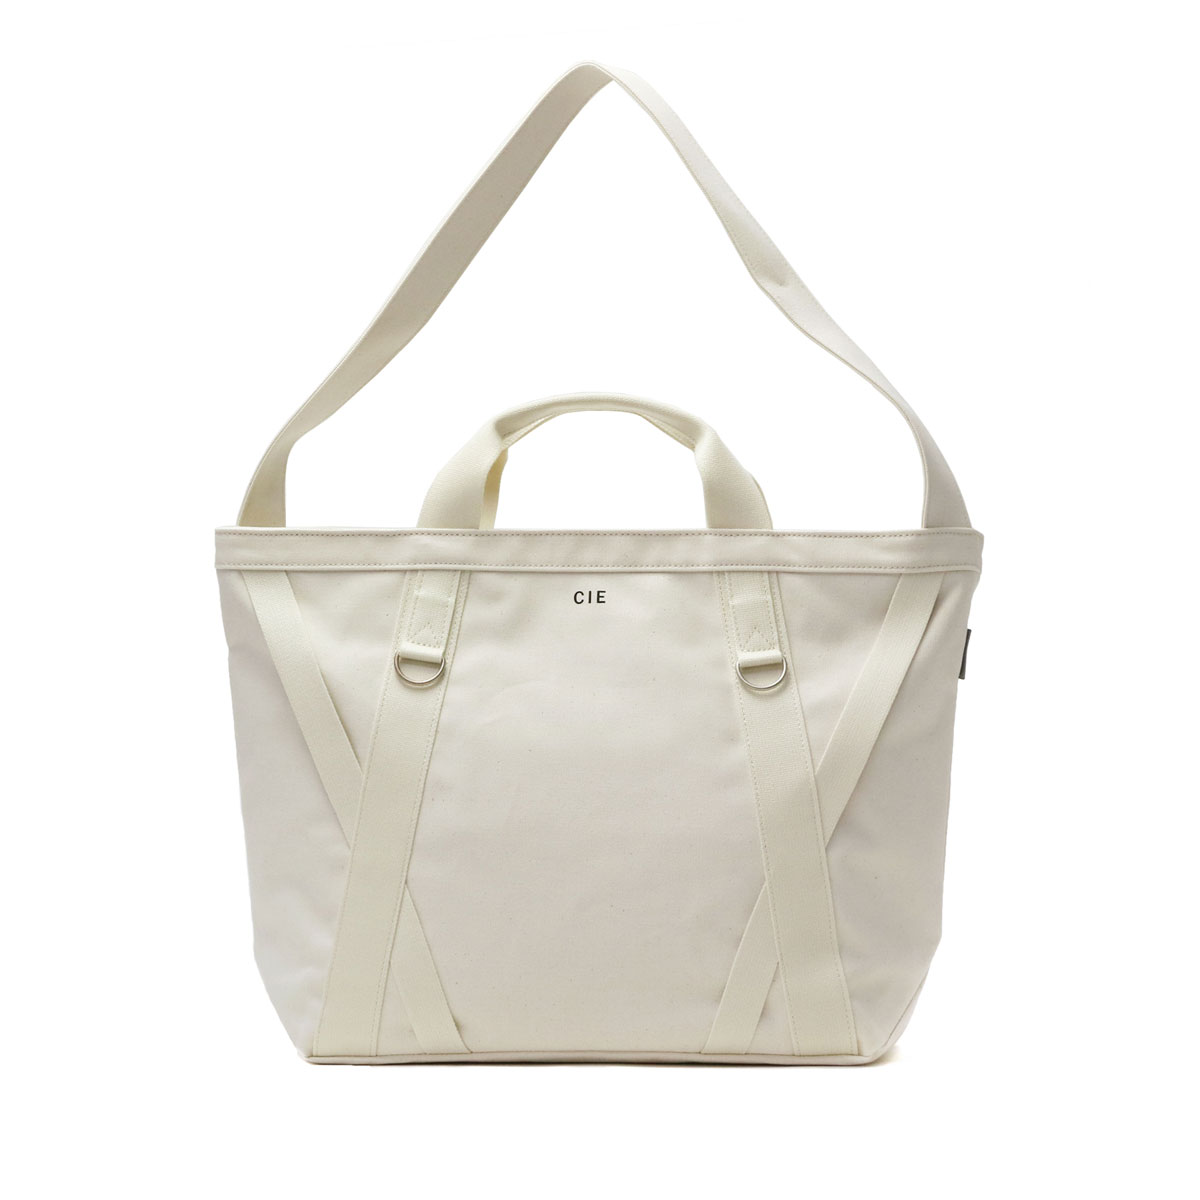 CIE シー DUCK CANVAS TOTE-L 2WAY トートバッグ 041800｜【正規販売店 